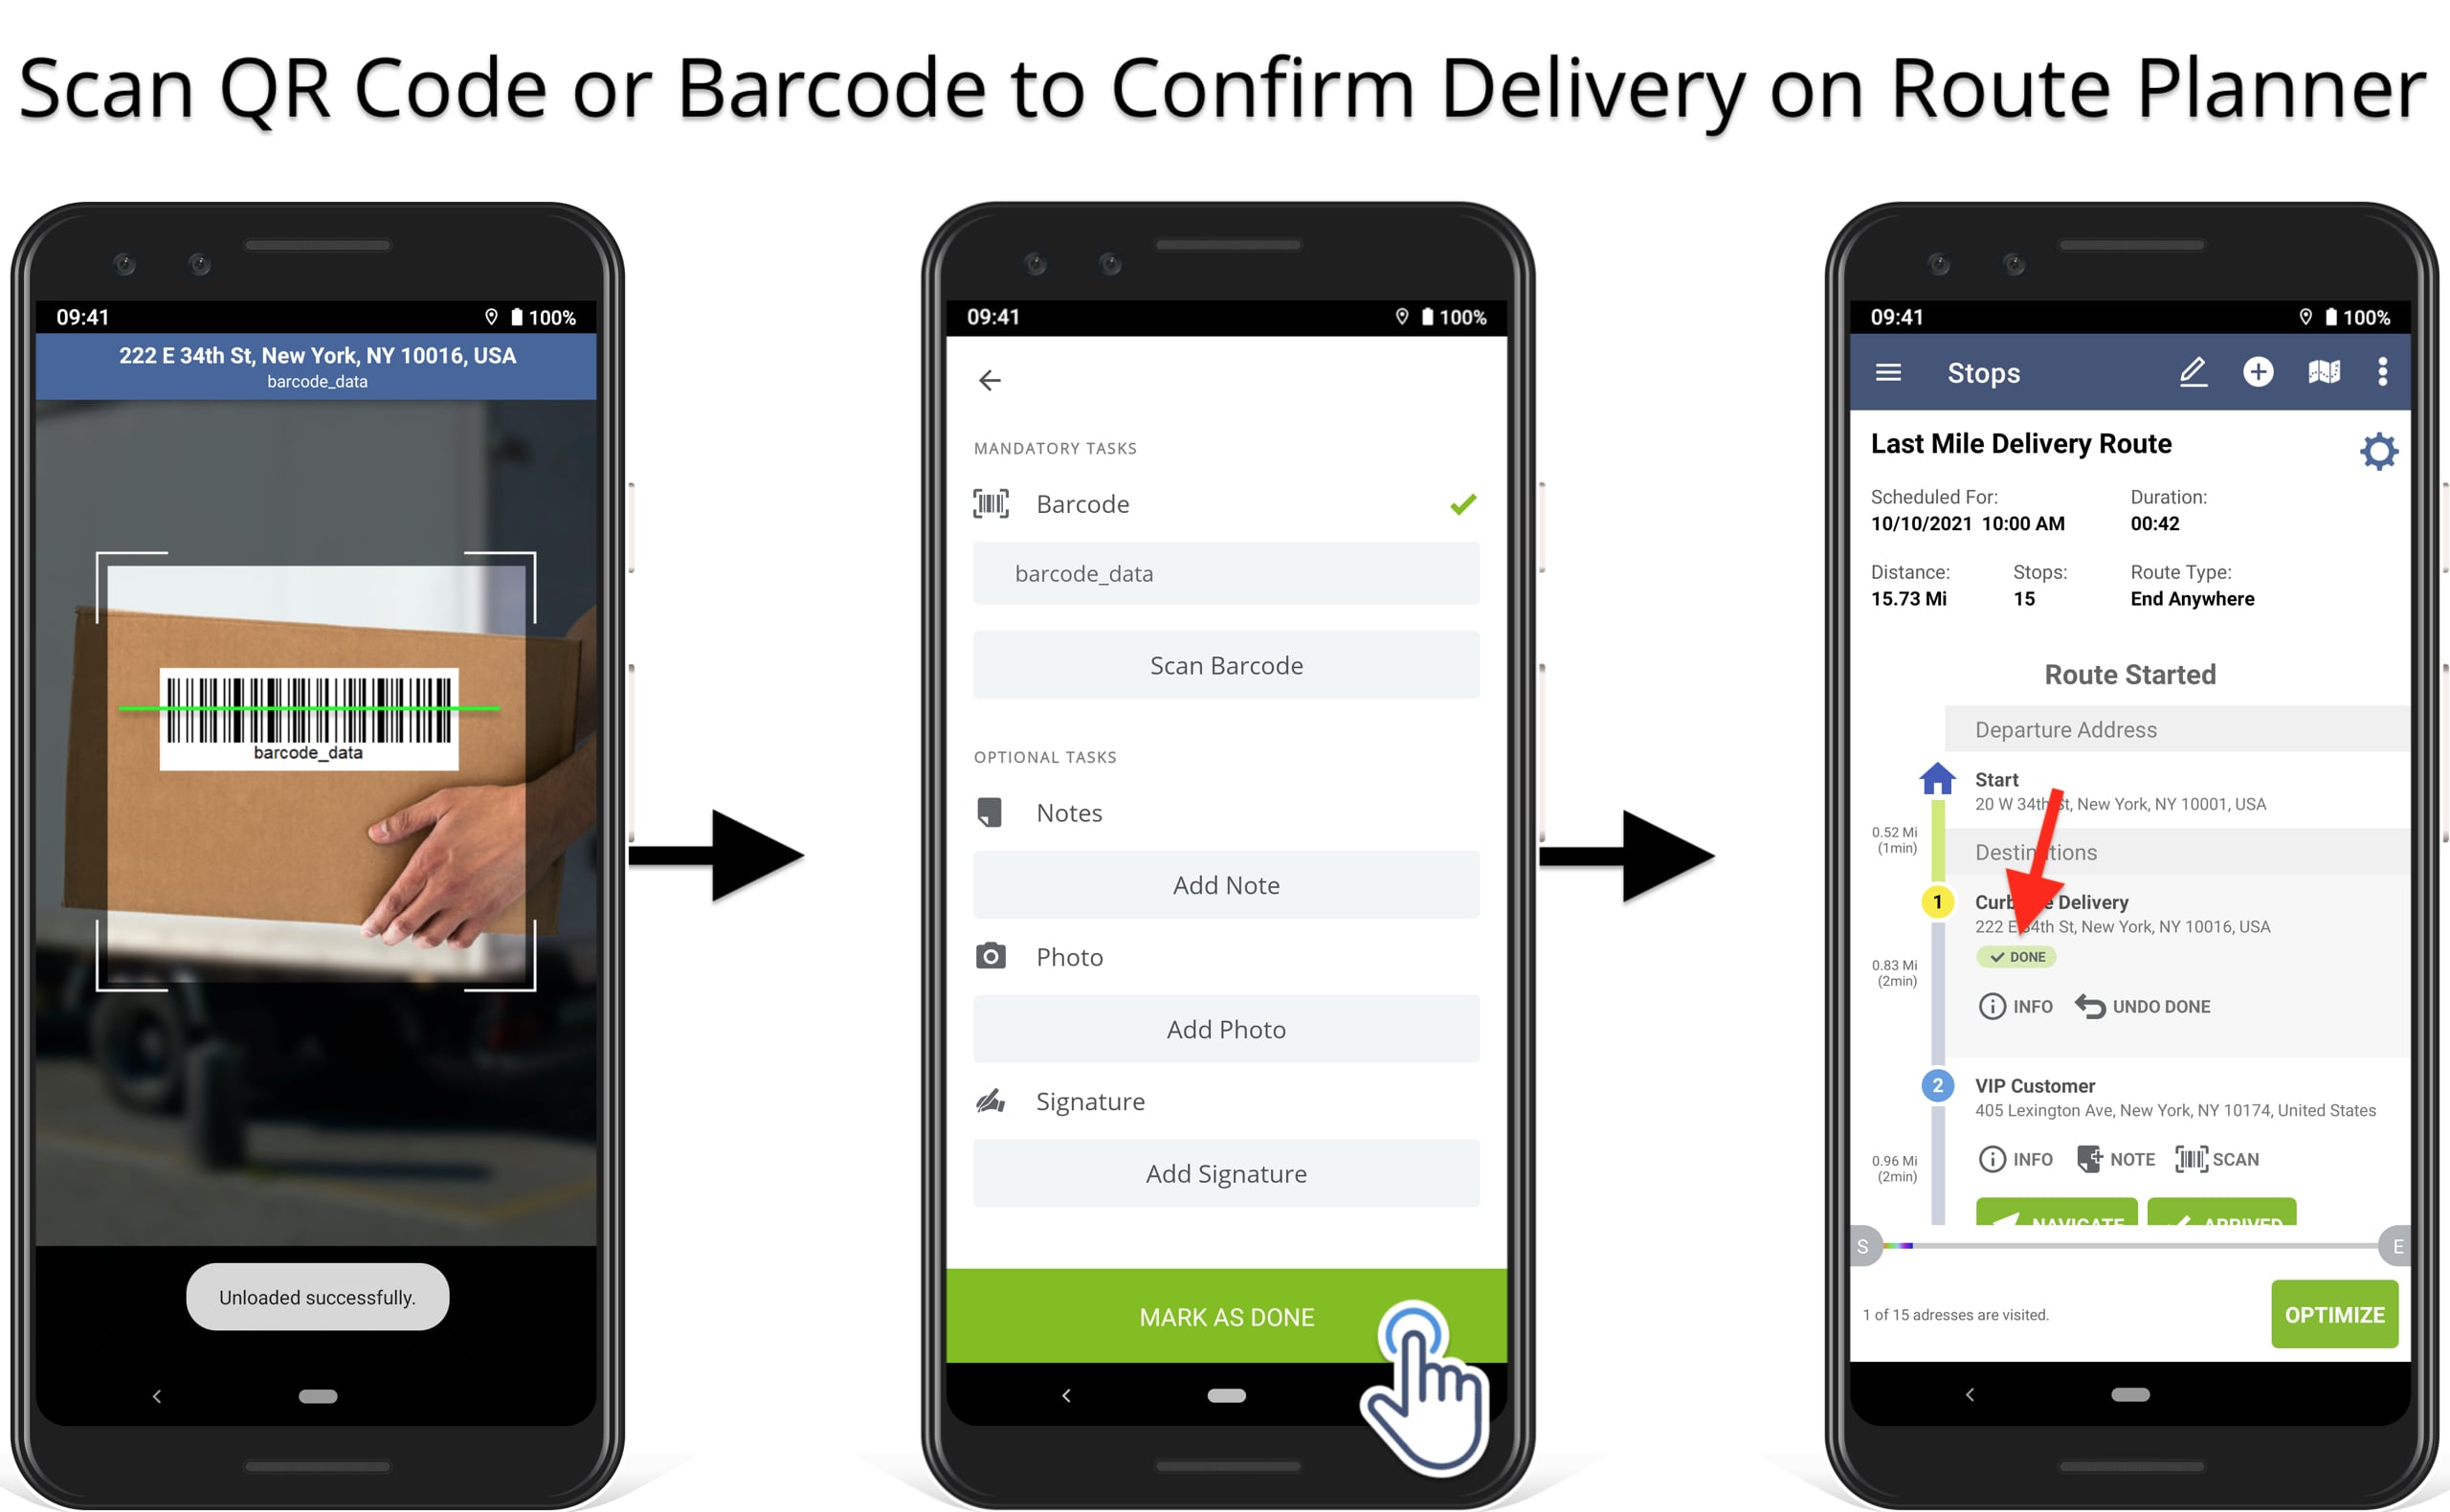 Scan QR code or barcode for package unloading and save proof of delivery on route planner app.